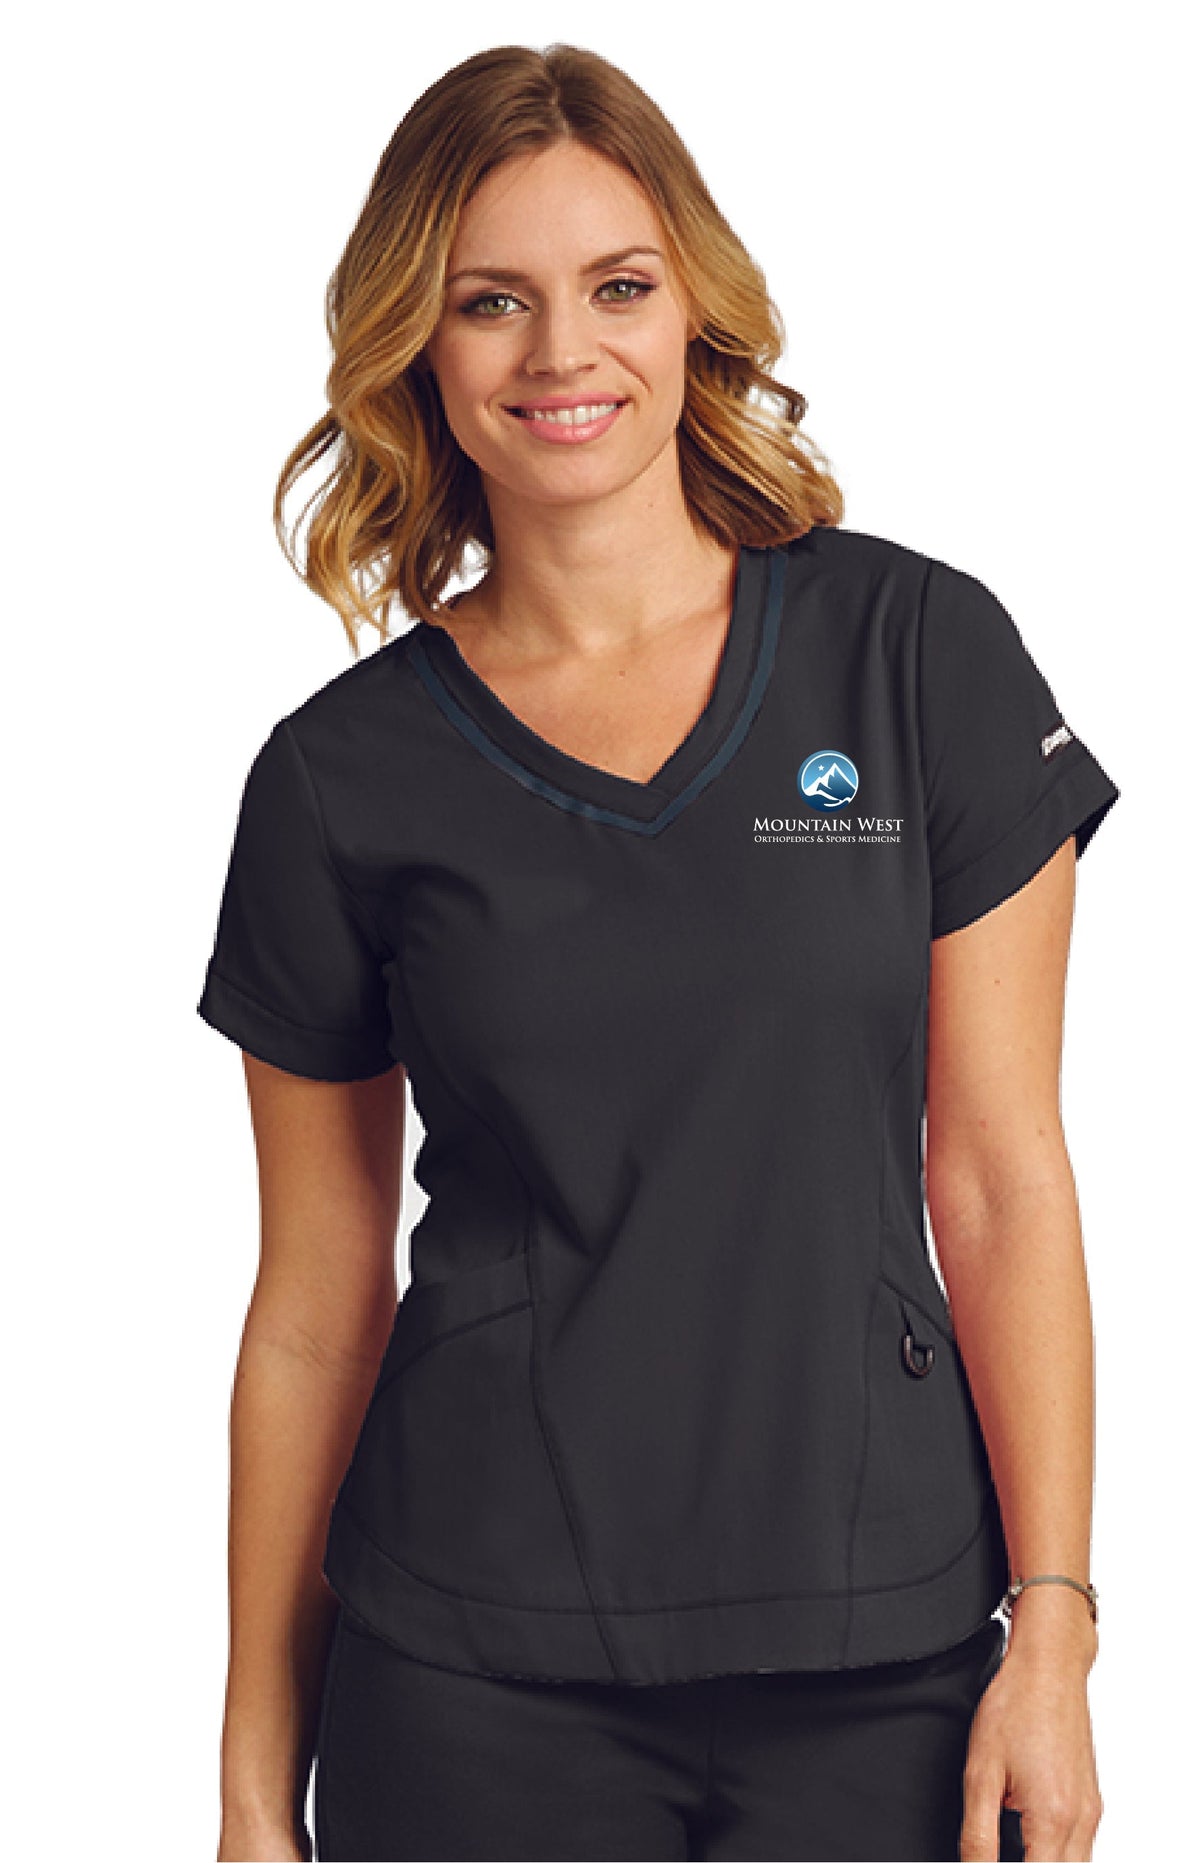 SVH - Ortho and Sports - 7187 Ladies 3 Pocket Barco Tape Top